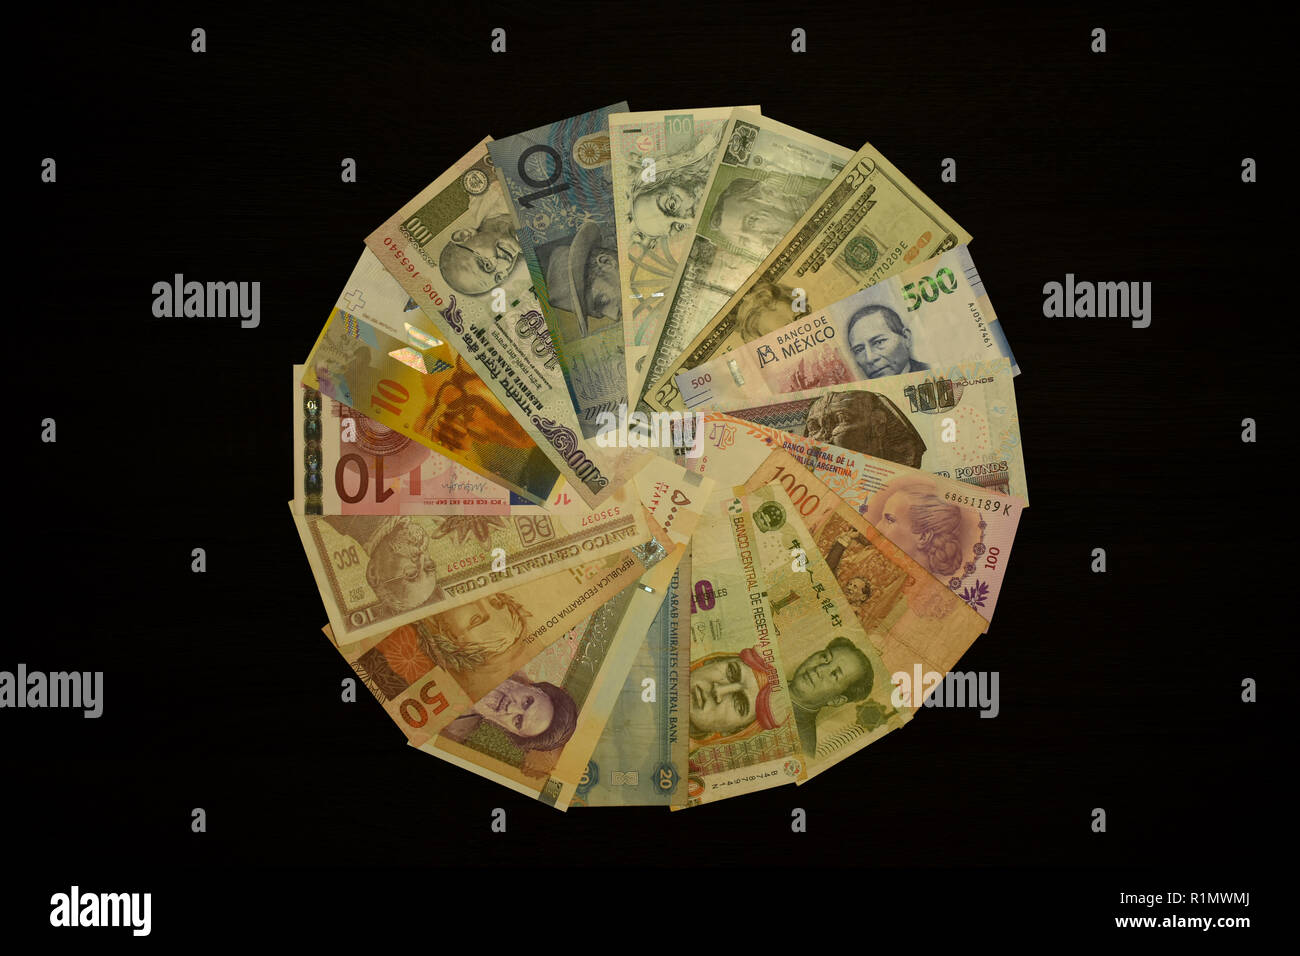 Currency notes from the world Stock Photo